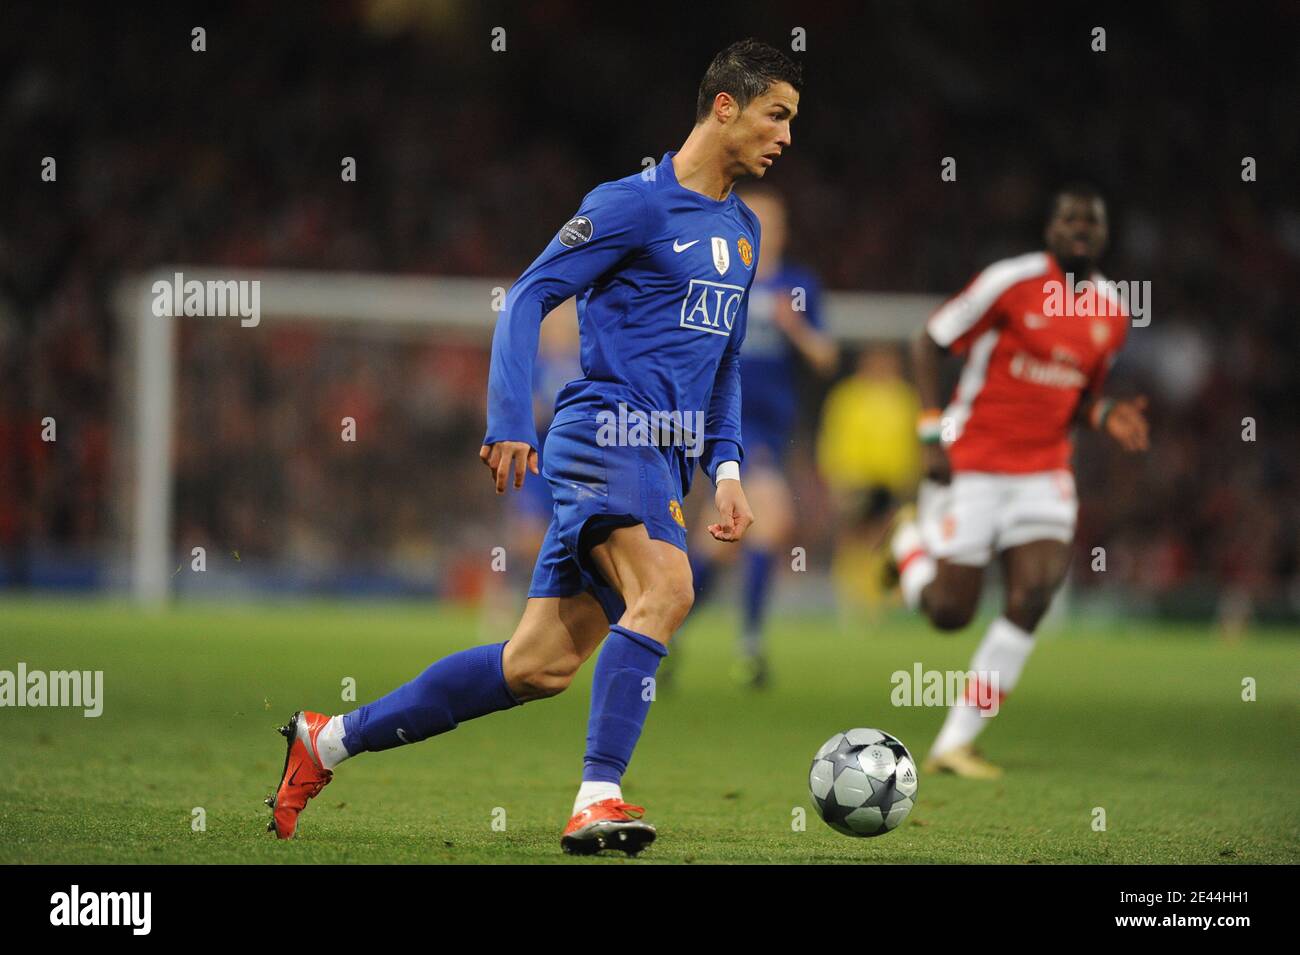 Manchester United'sCristiano Ronaldo during the UEFA Champions League soccer match, Semi Final, Second Leg, Arsenal vs Manchester United at the Emirates Stadium in London, UK on May 5, 2009. Manchester United won 3-1. Photo by Steeve McMay/ABACAPRESS.COM Stock Photo